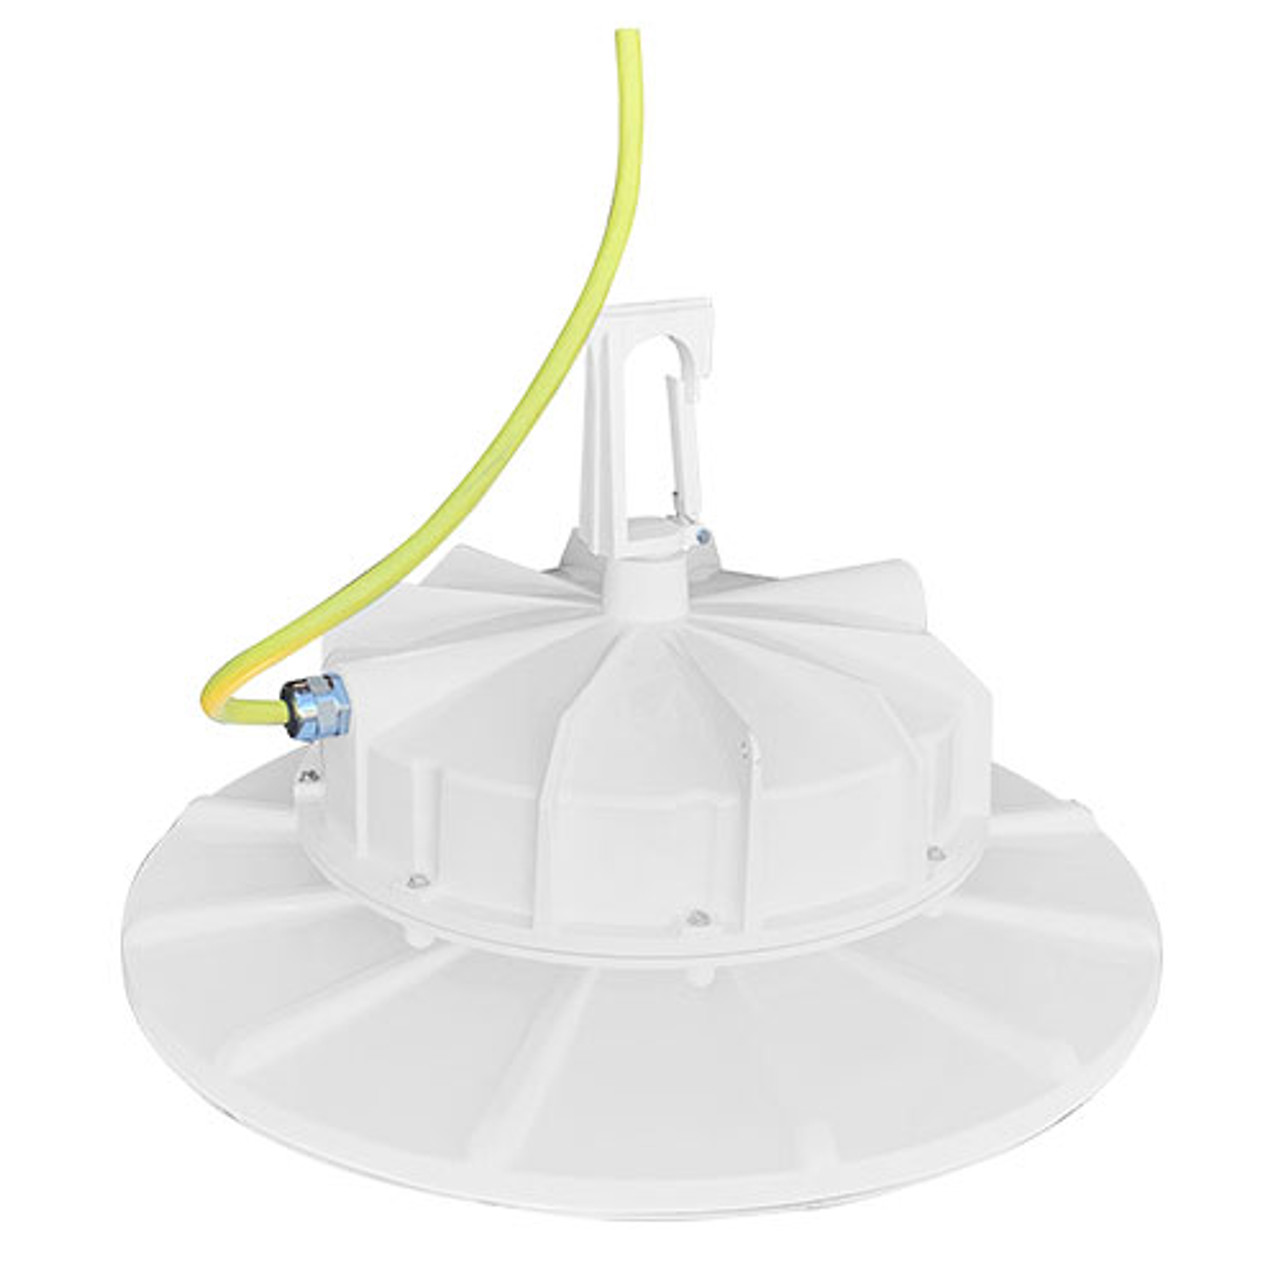 NSF Highbay for use in Food, Manufacturing, and Around Livestock